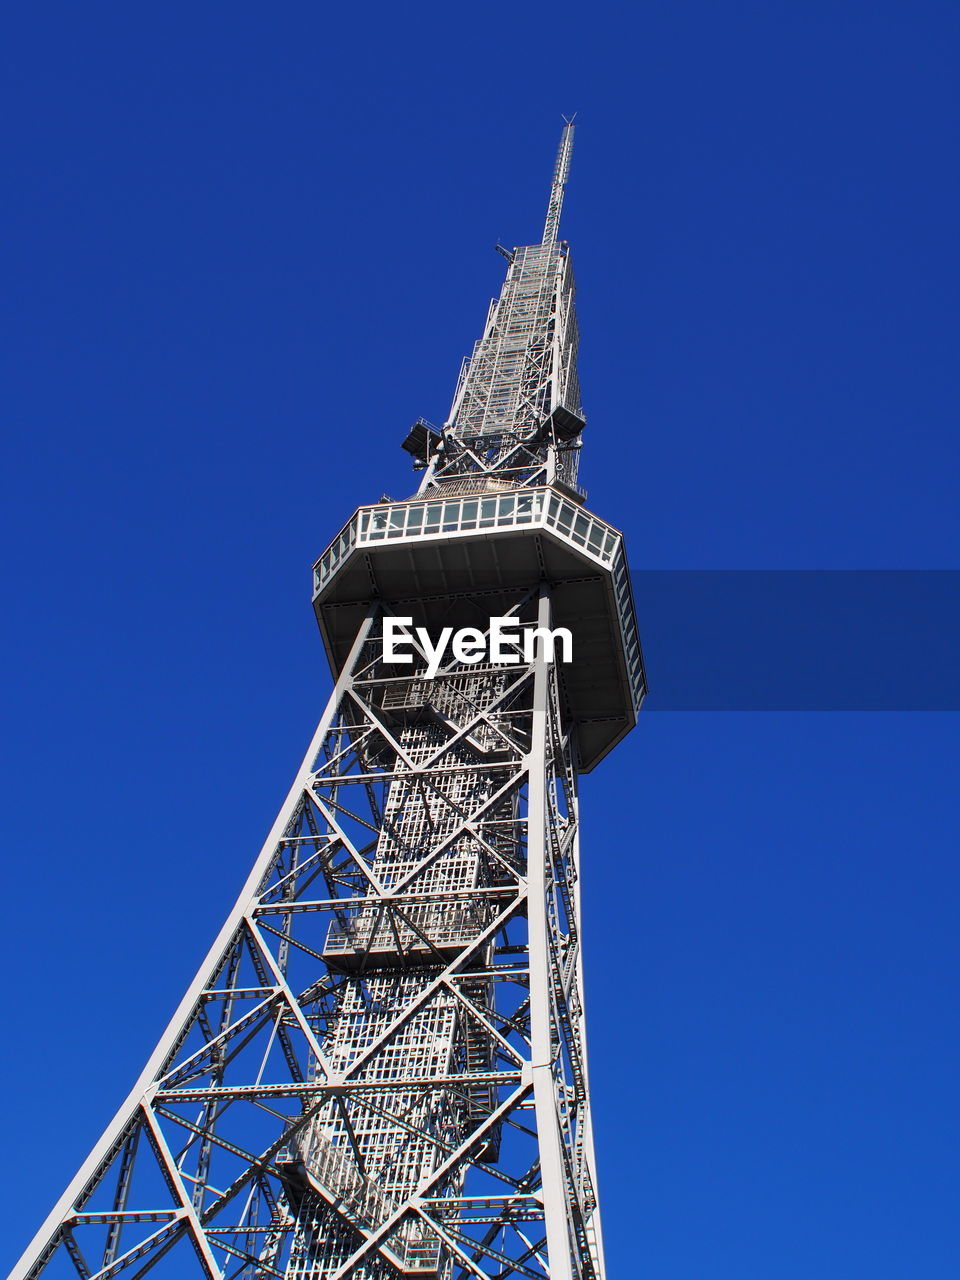 Low angle view of nagoya tower showing structure, observation deck and top of the tower